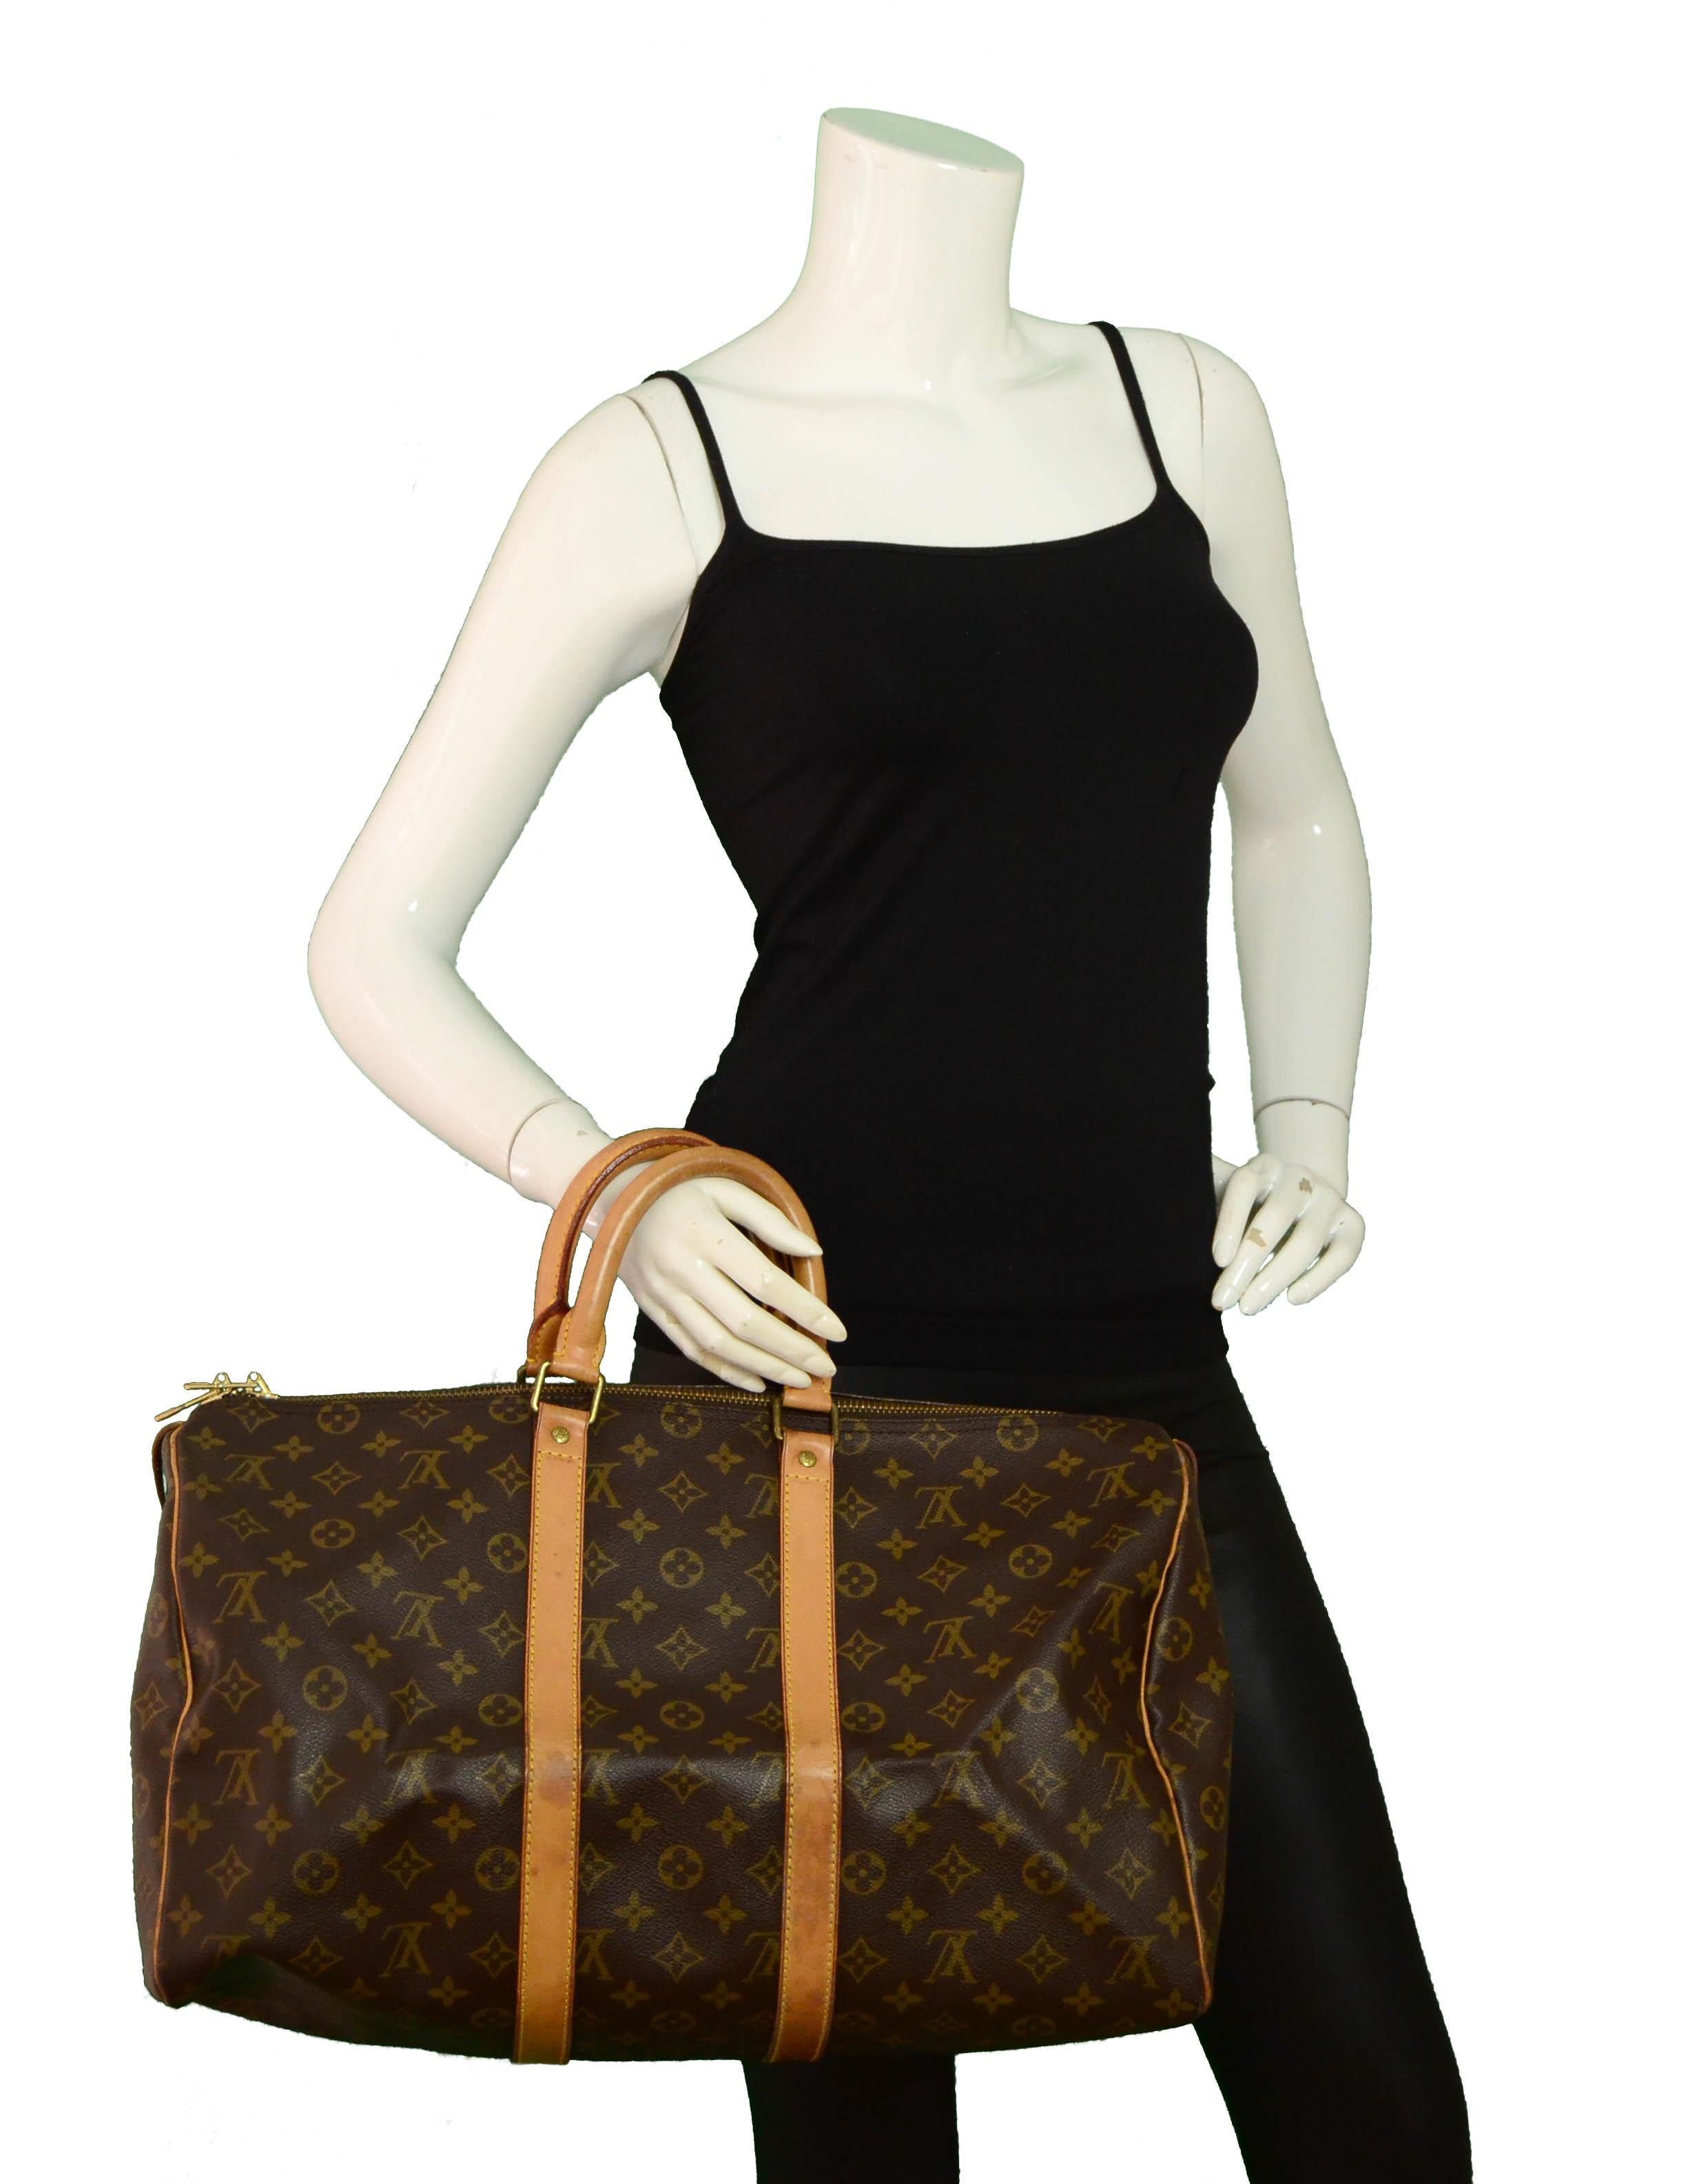 Louis Vuitton Monogram Keepall 45 Duffle Bag

Made In: France
Year of Production: 1990
Color: Brown Monogram
Hardware: Goldtone
Materials: Coated canvas & vachetta leather
Lining: Canvas
Closure/Opening: Zipper
Exterior Condition: Very good